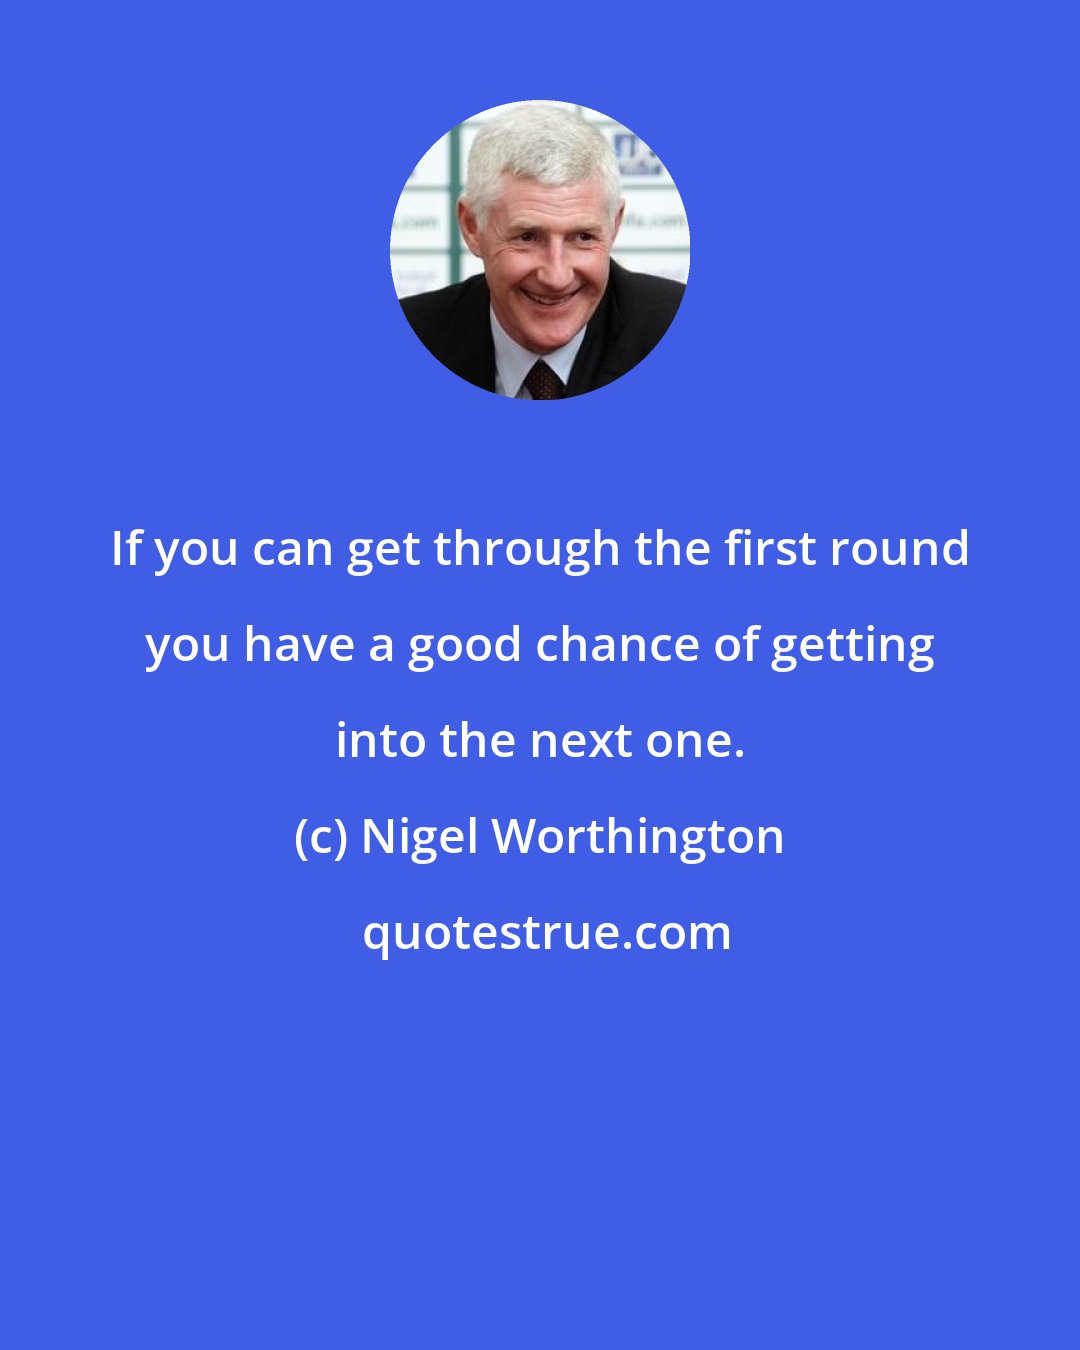 Nigel Worthington: If you can get through the first round you have a good chance of getting into the next one.